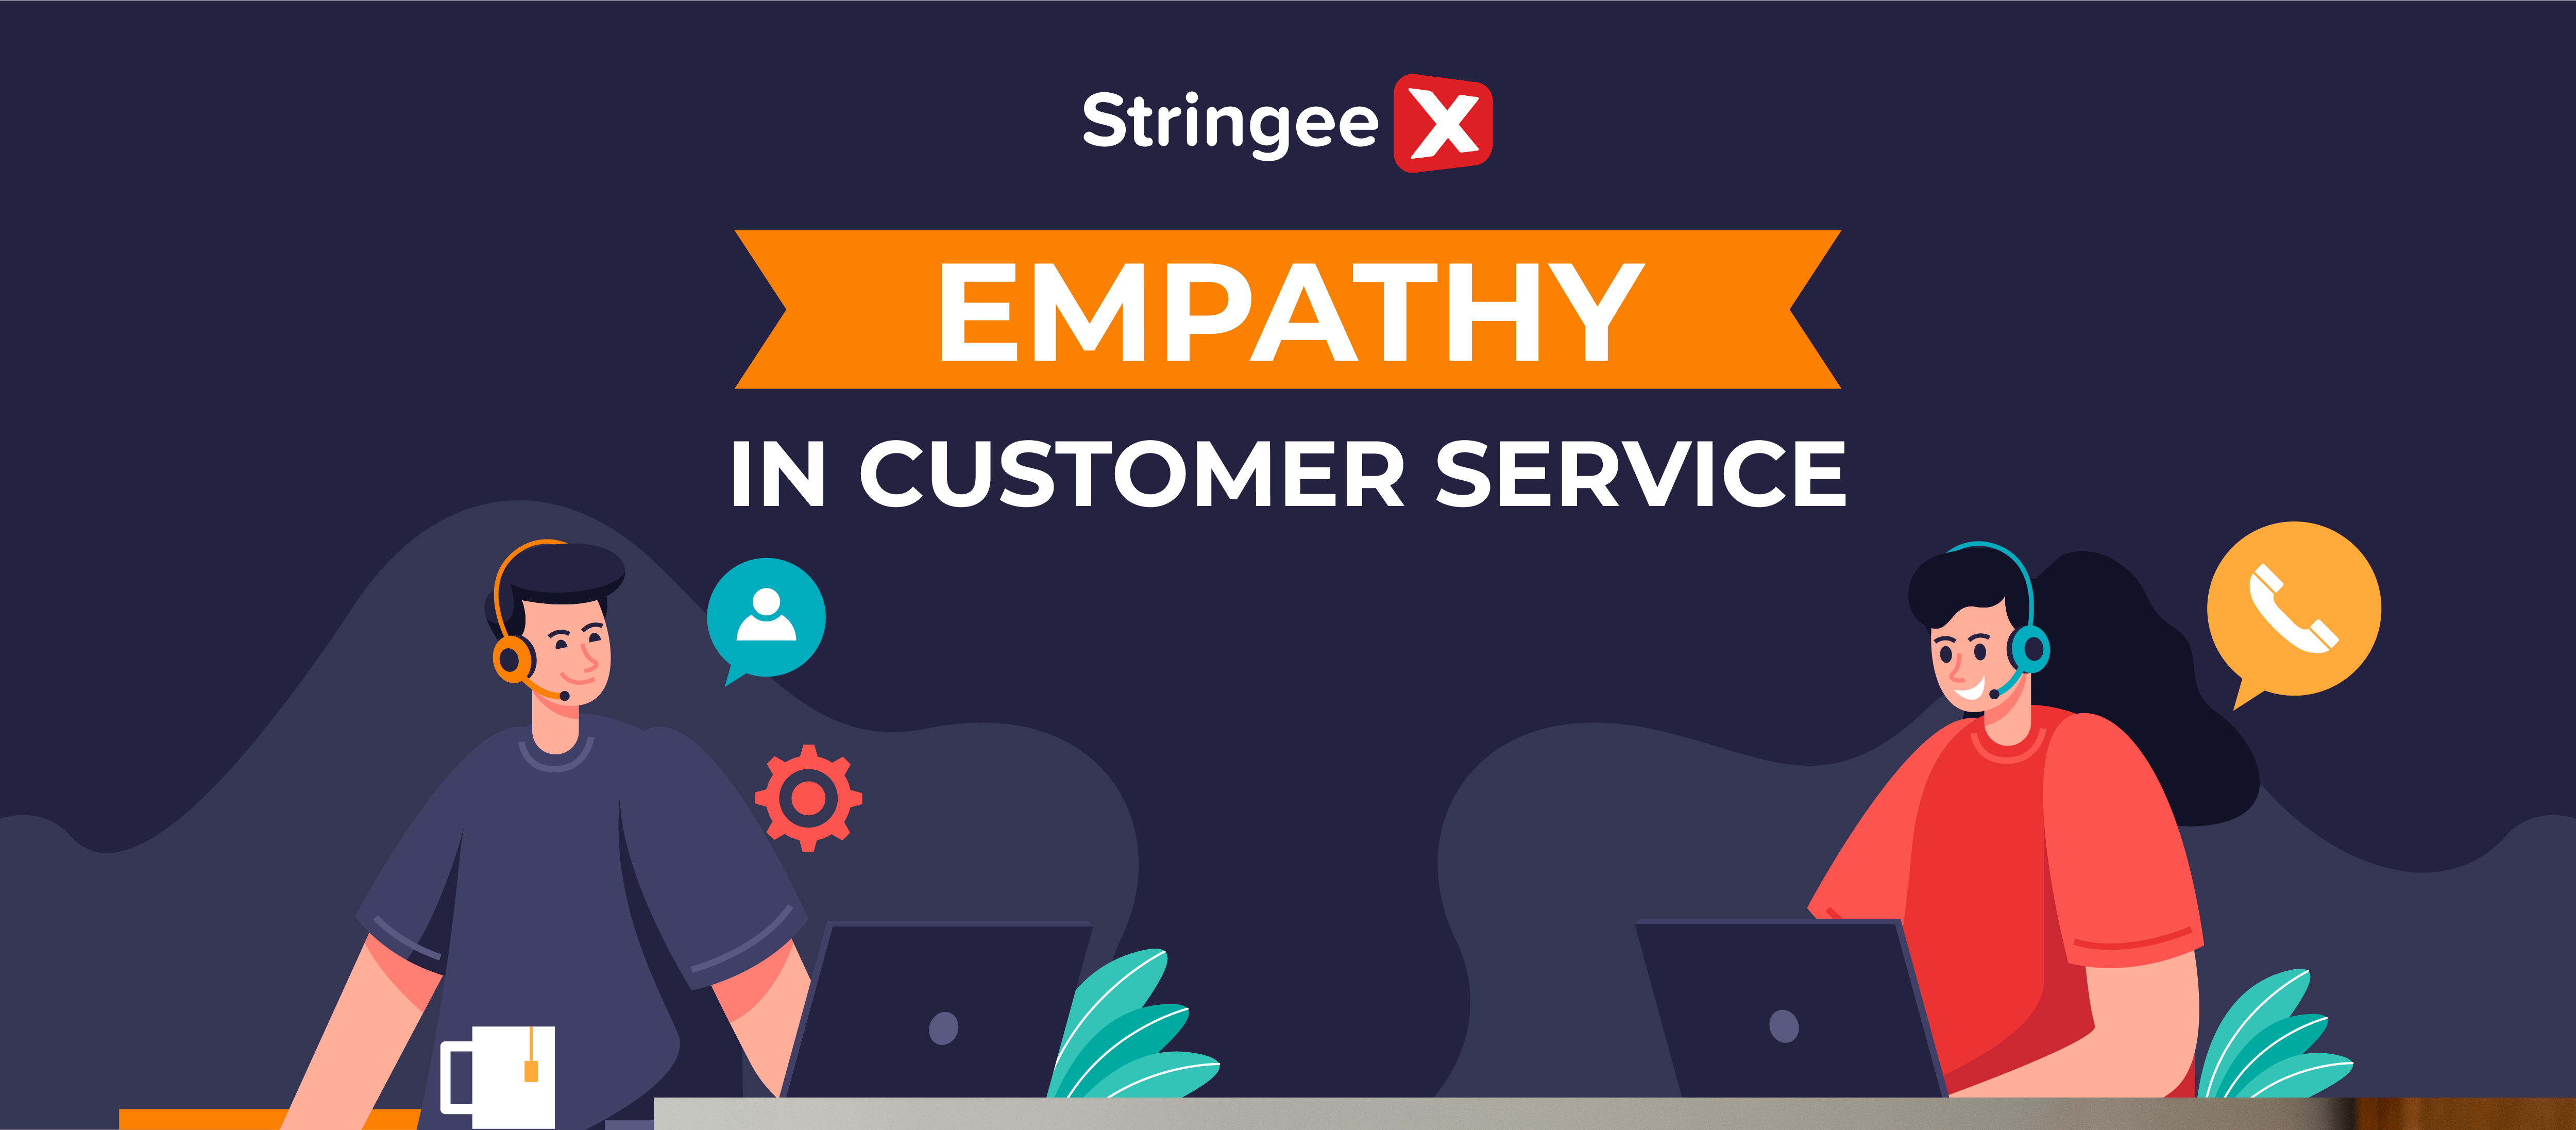 How To Practise Empathy In Customer Service? 3 Big Tips